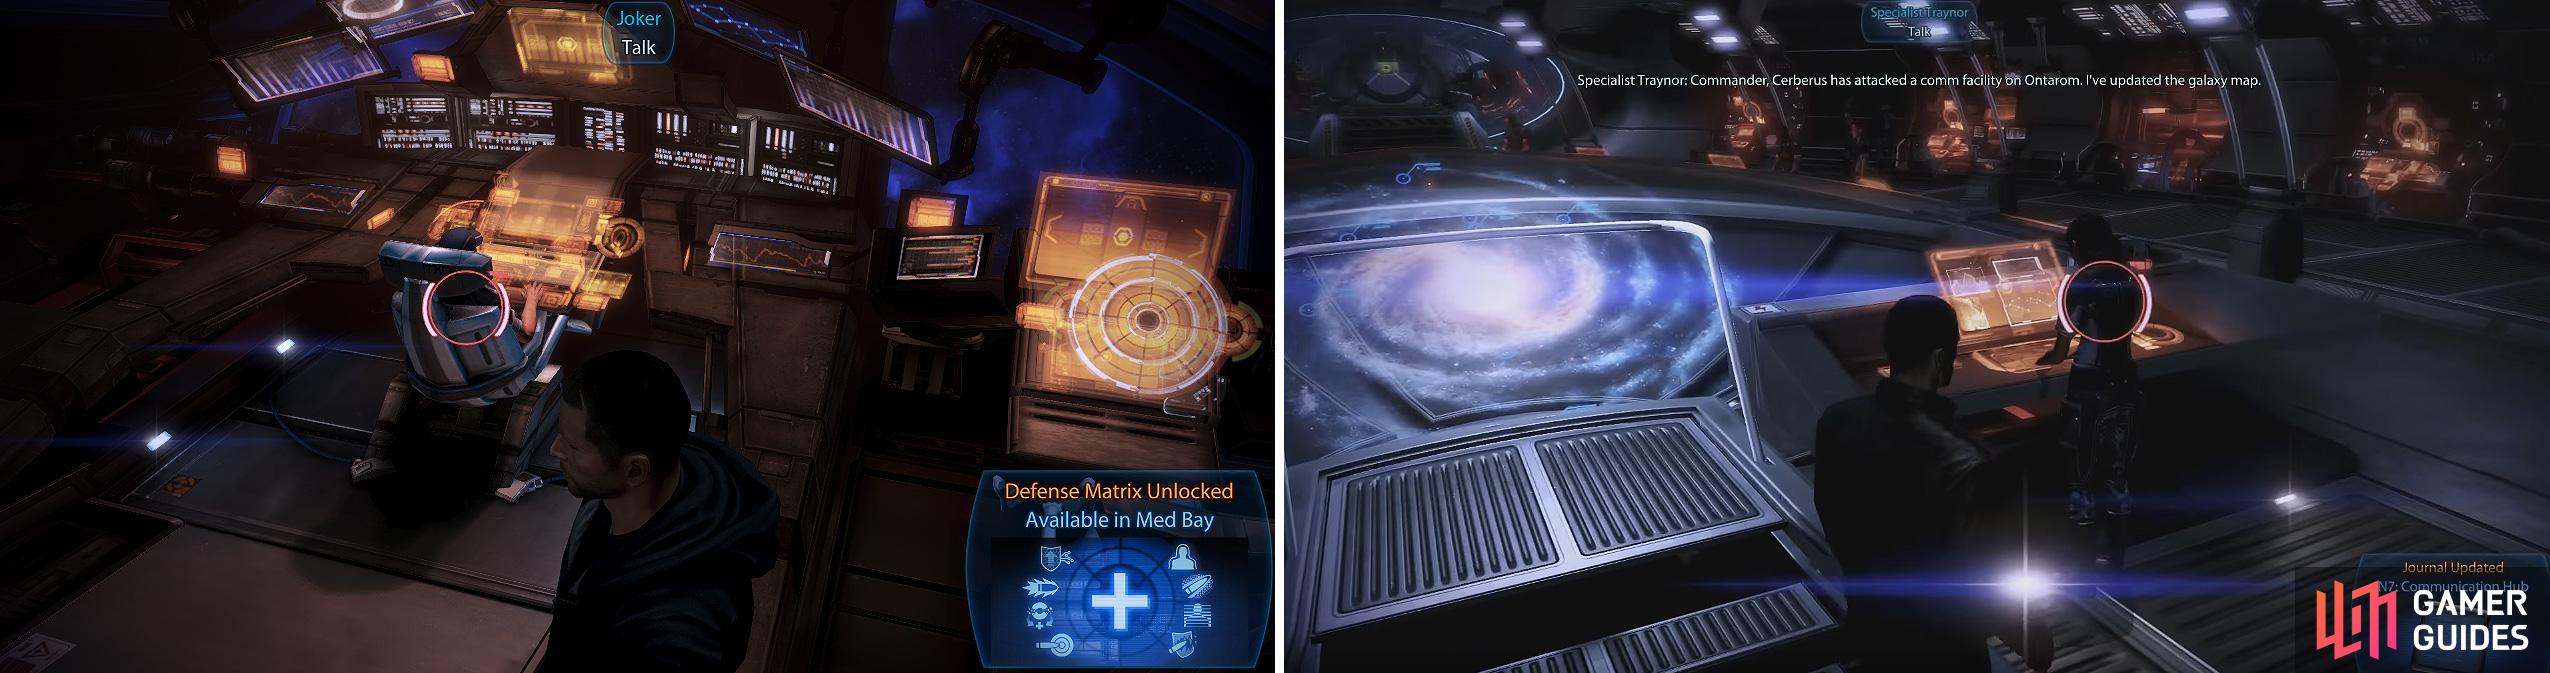 EDI’s Defense Matrix skill (left) can be unlocked and you can also visit Traynor for another N7 mission (right).